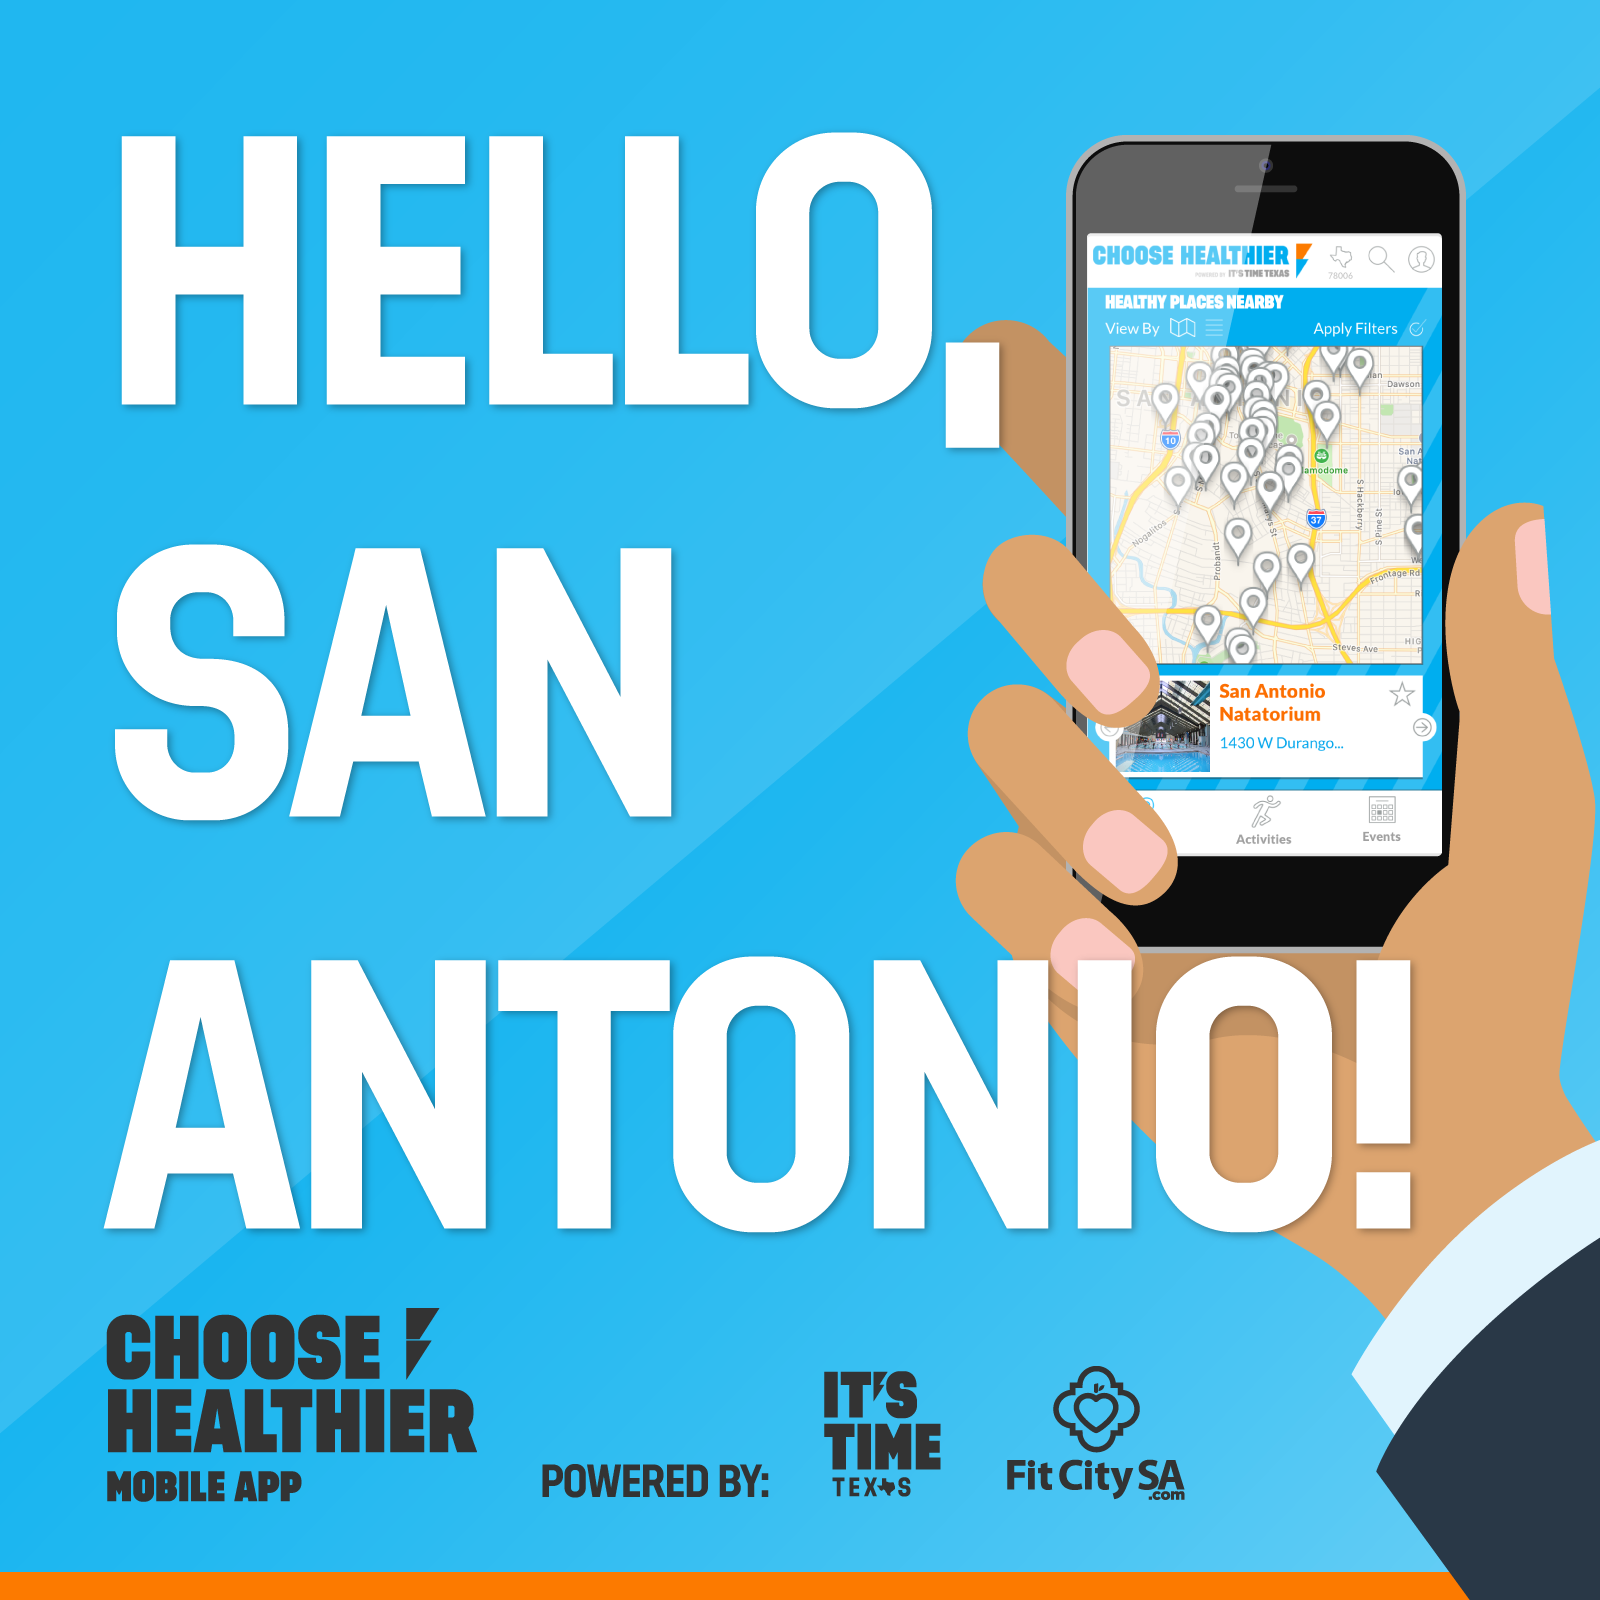 Featured image for “Find Free Healthy Activities in San Antonio, Thanks to FitCitySA!”